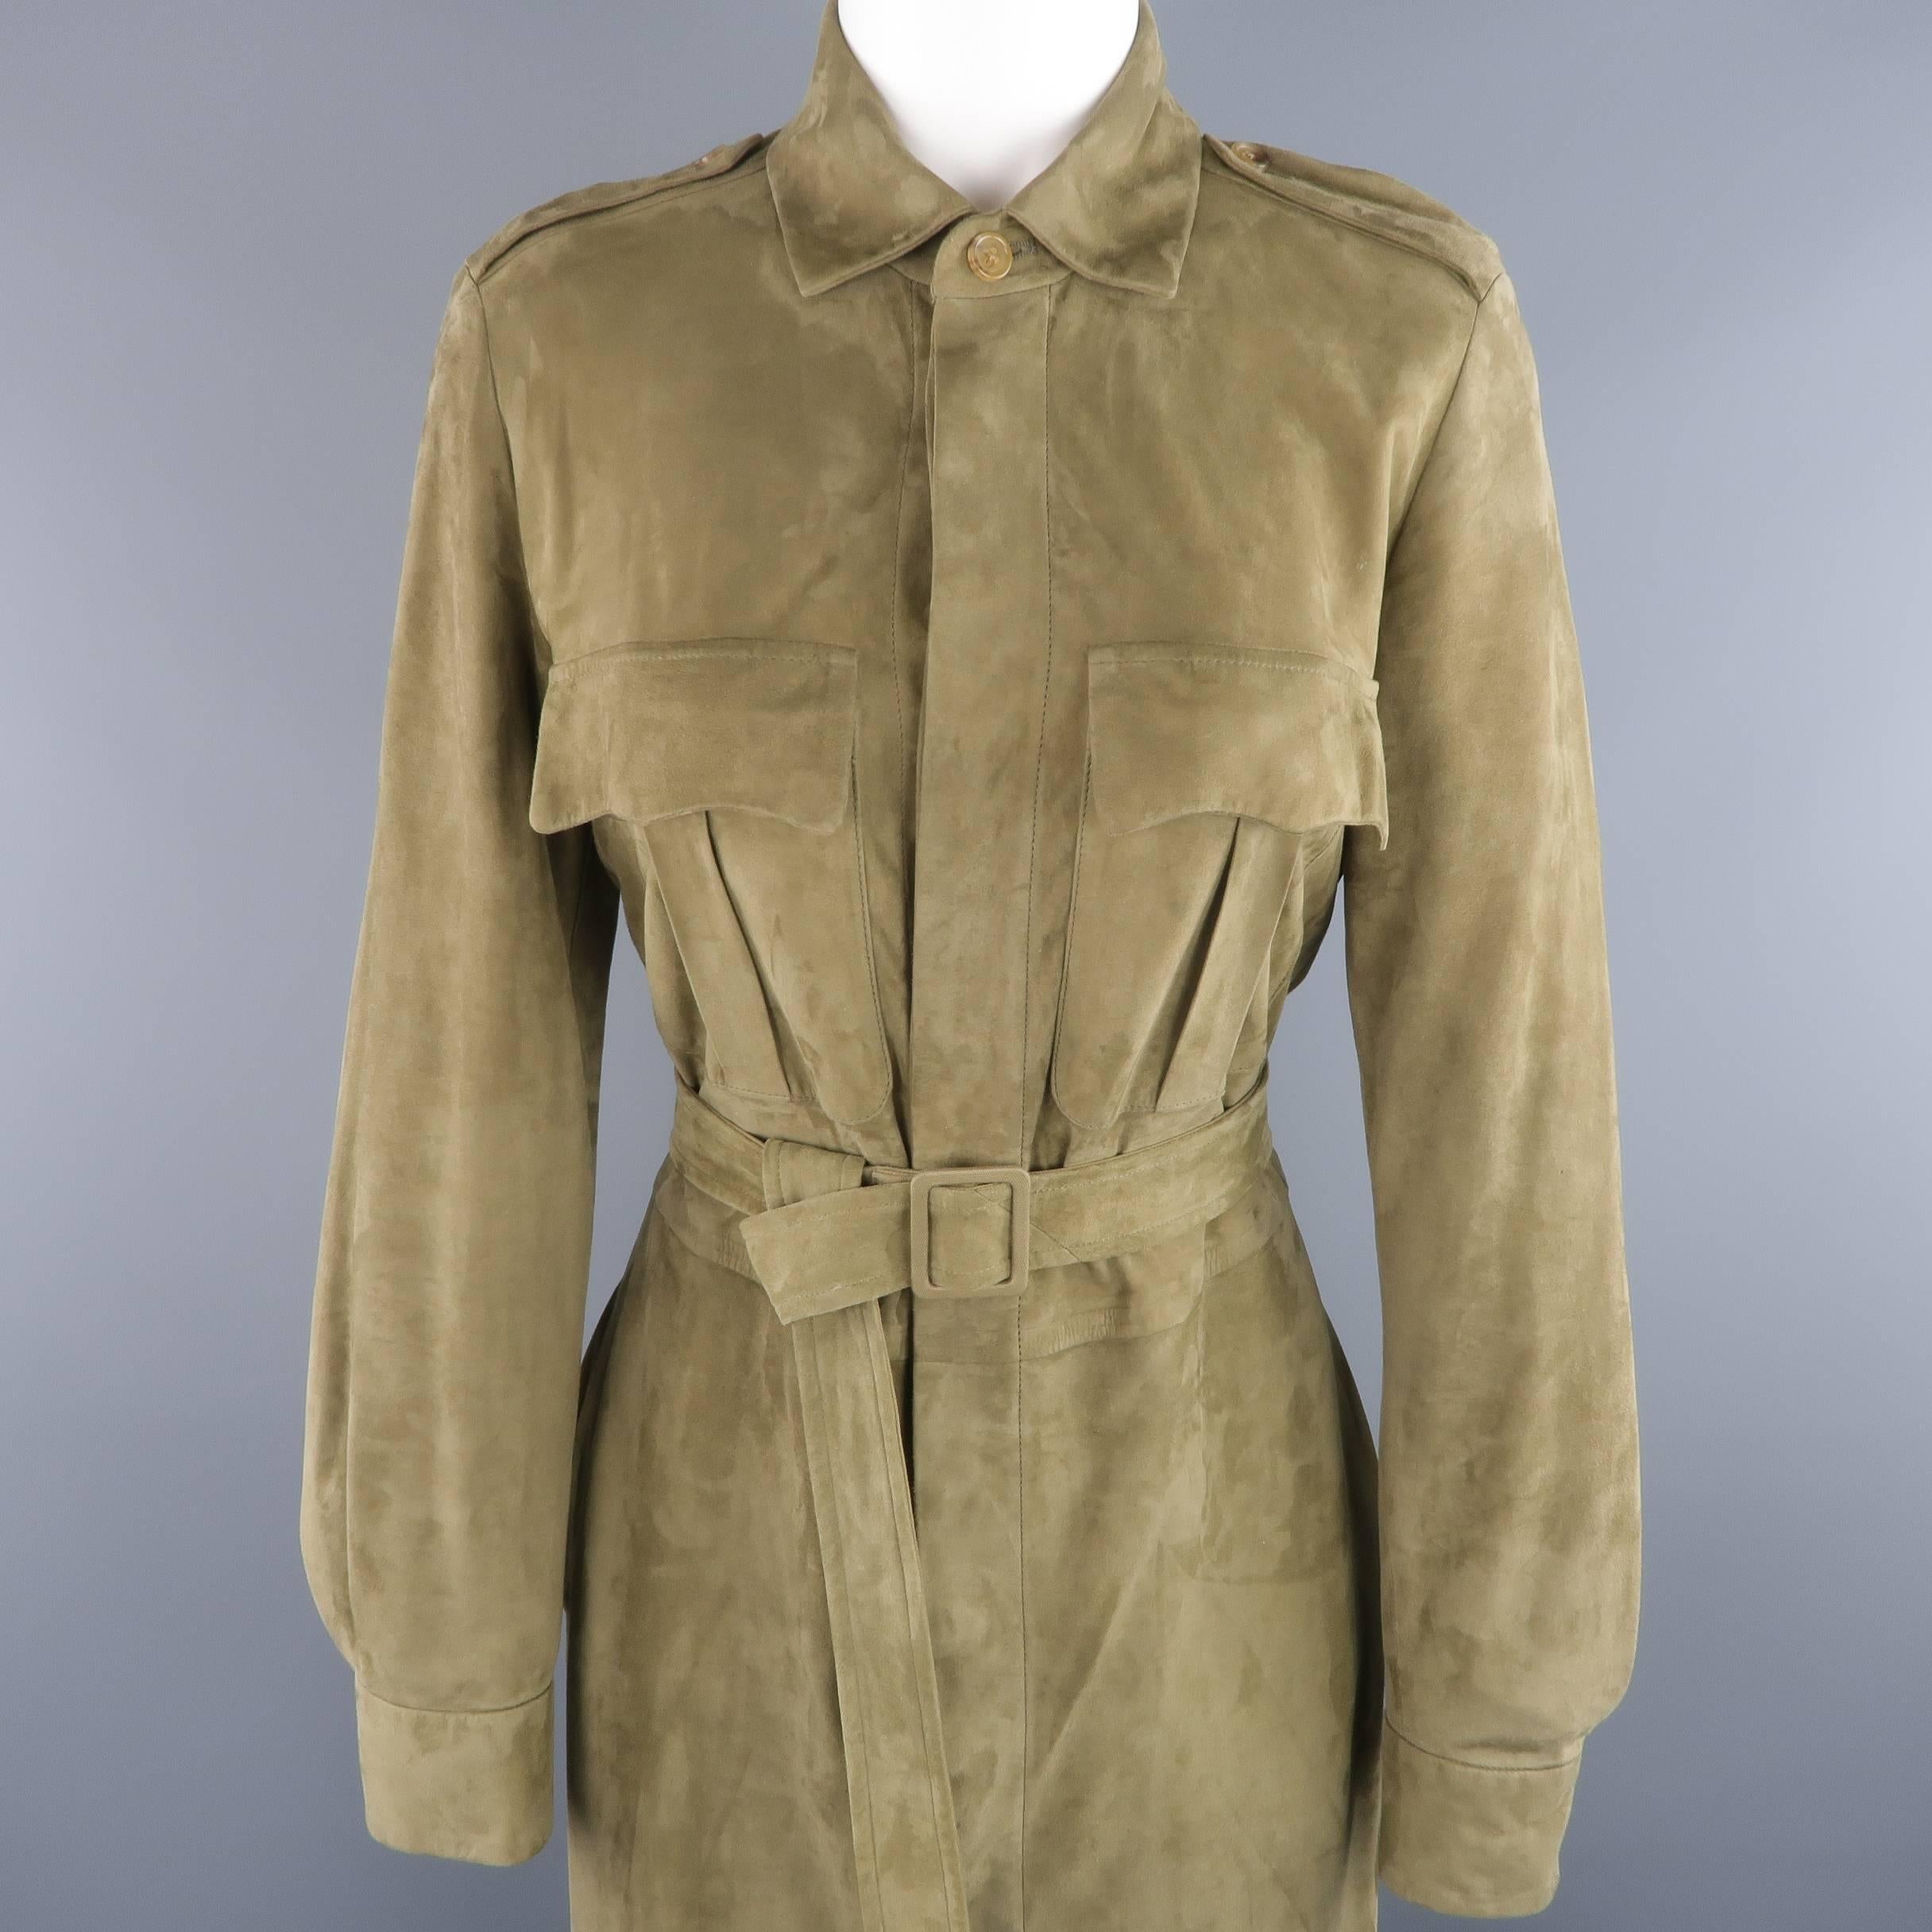 Ralph Lauren Collection safari sheath dress comes in soft olive green sheep skin suede and features a hidden placket button up front, double pleated patch flap pockets, epaulets, button cuff sleeves, and matching canvas buckle belt. Made in Italy. 